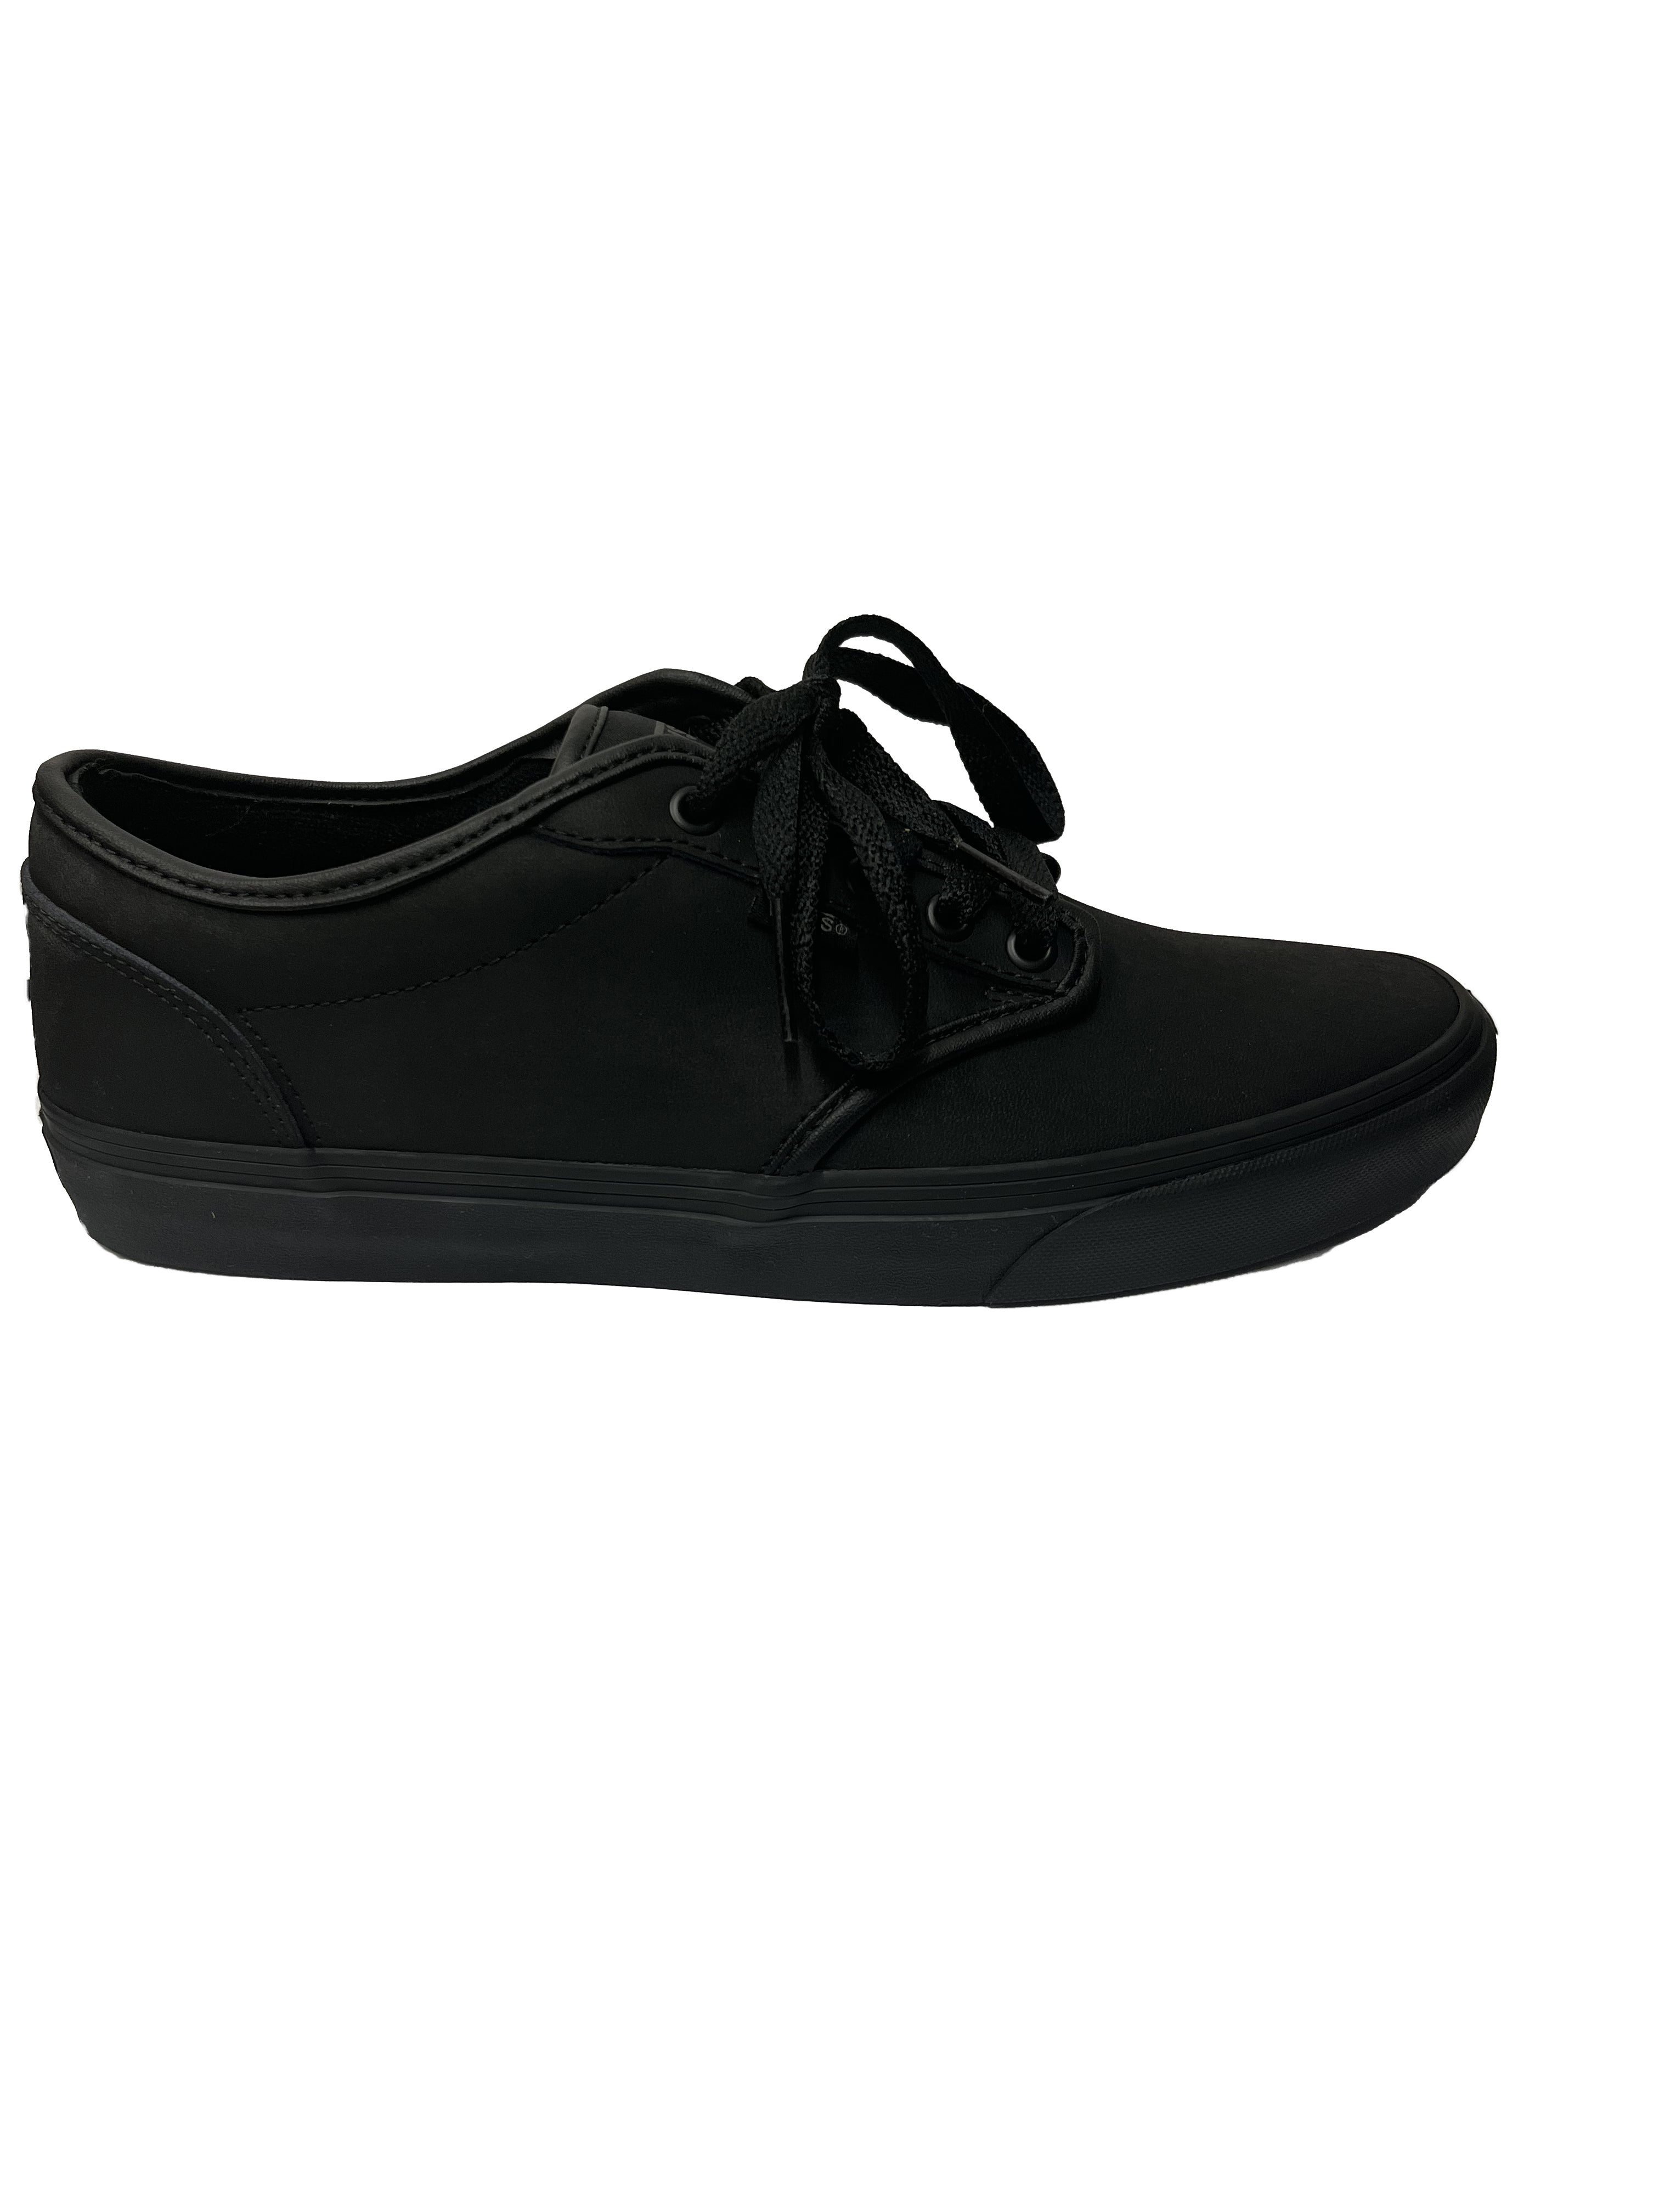 Vans Atwood Triple Black Leather Trainers